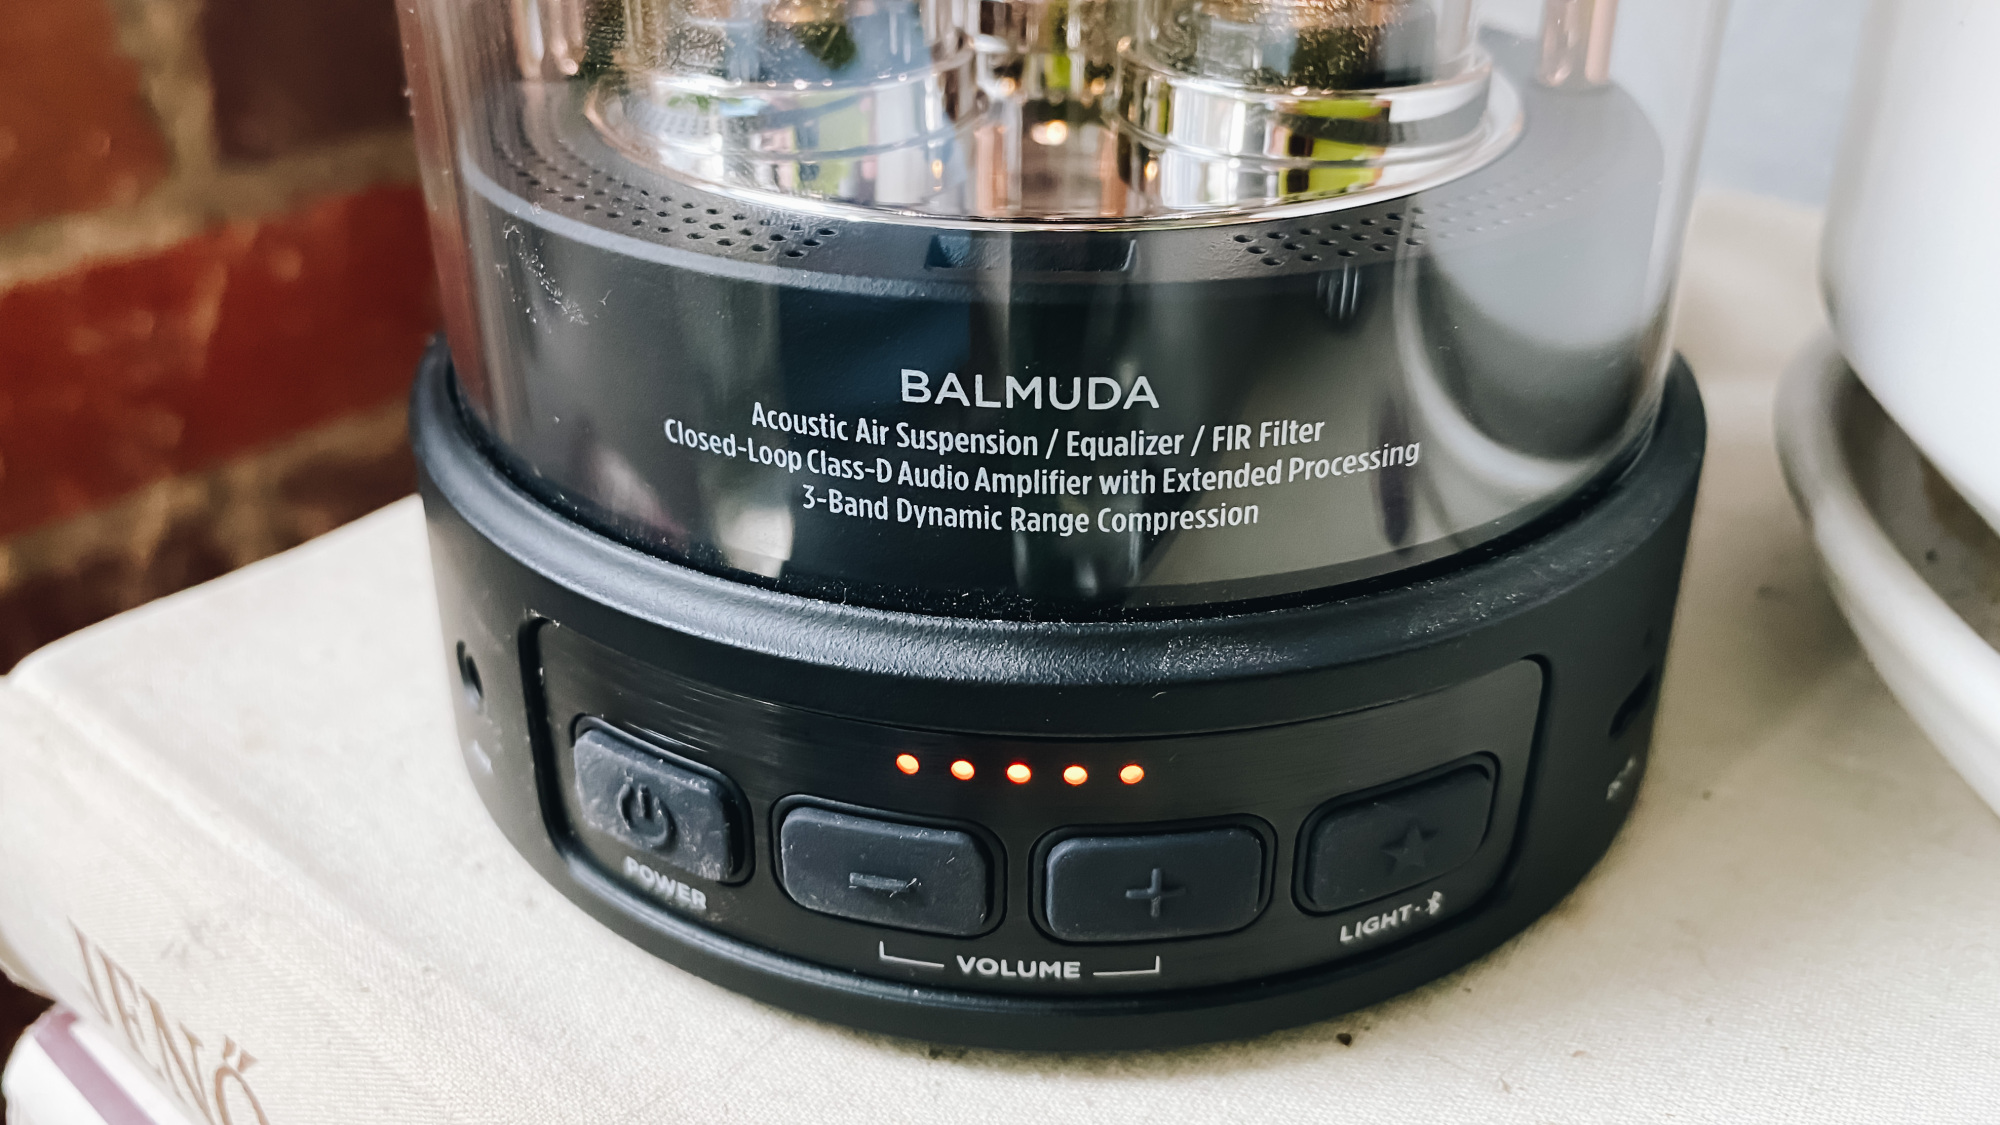 power, volume, and light buttons at the bottom of the balmuda speaker